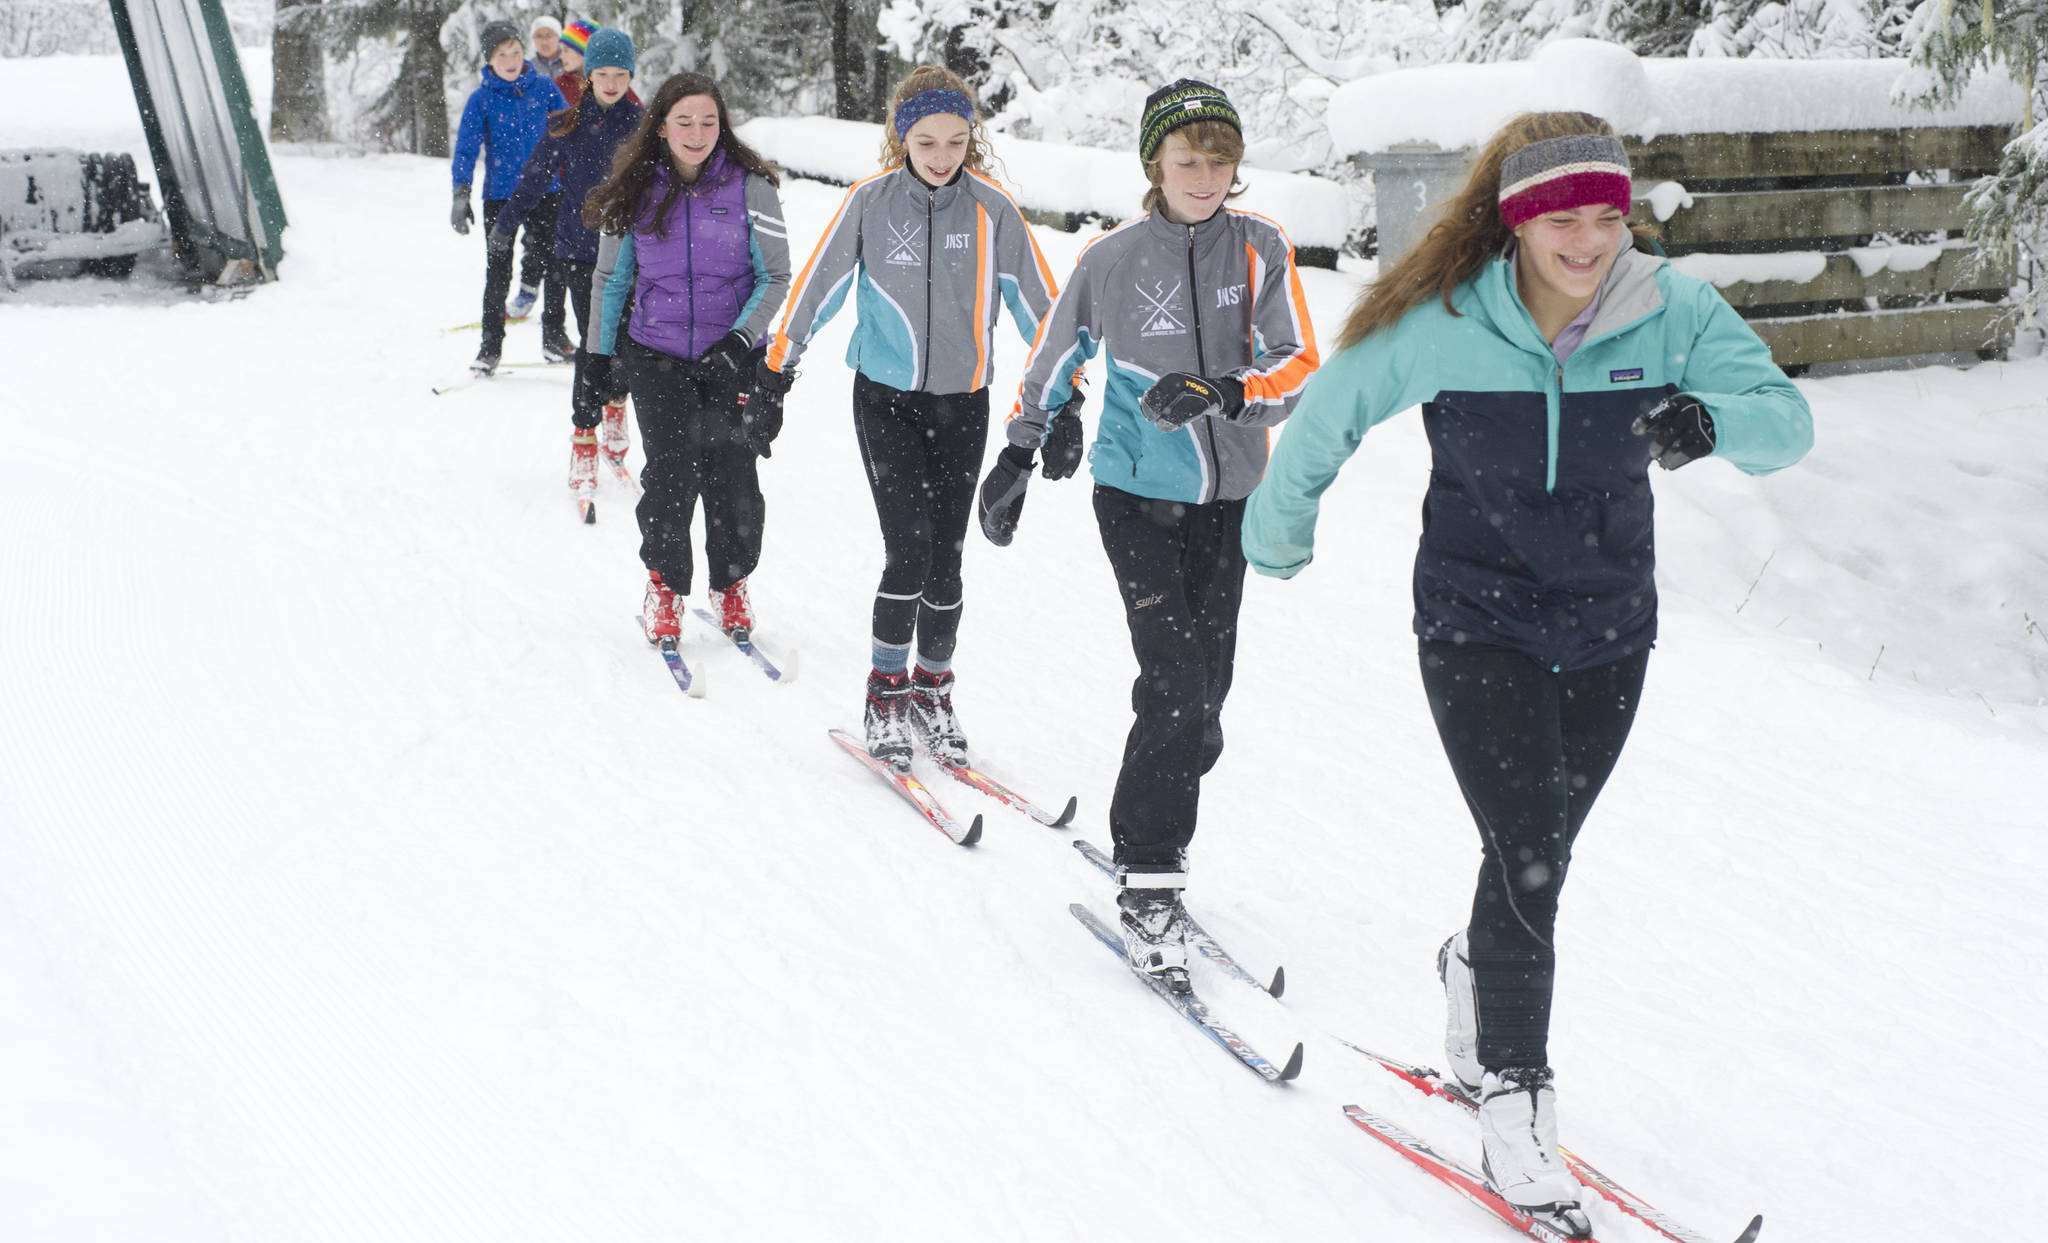 Juneau Nordic Ski Team members Erin Wallace, front, leads Aaron Blust and Anna Iverson in a pole-less skiing drill through fresh snow on Saturday, Nov. 18, 2017, at the Mendenhall Campgrounds. (Nolin Ainsworth | Juneau Empire File)